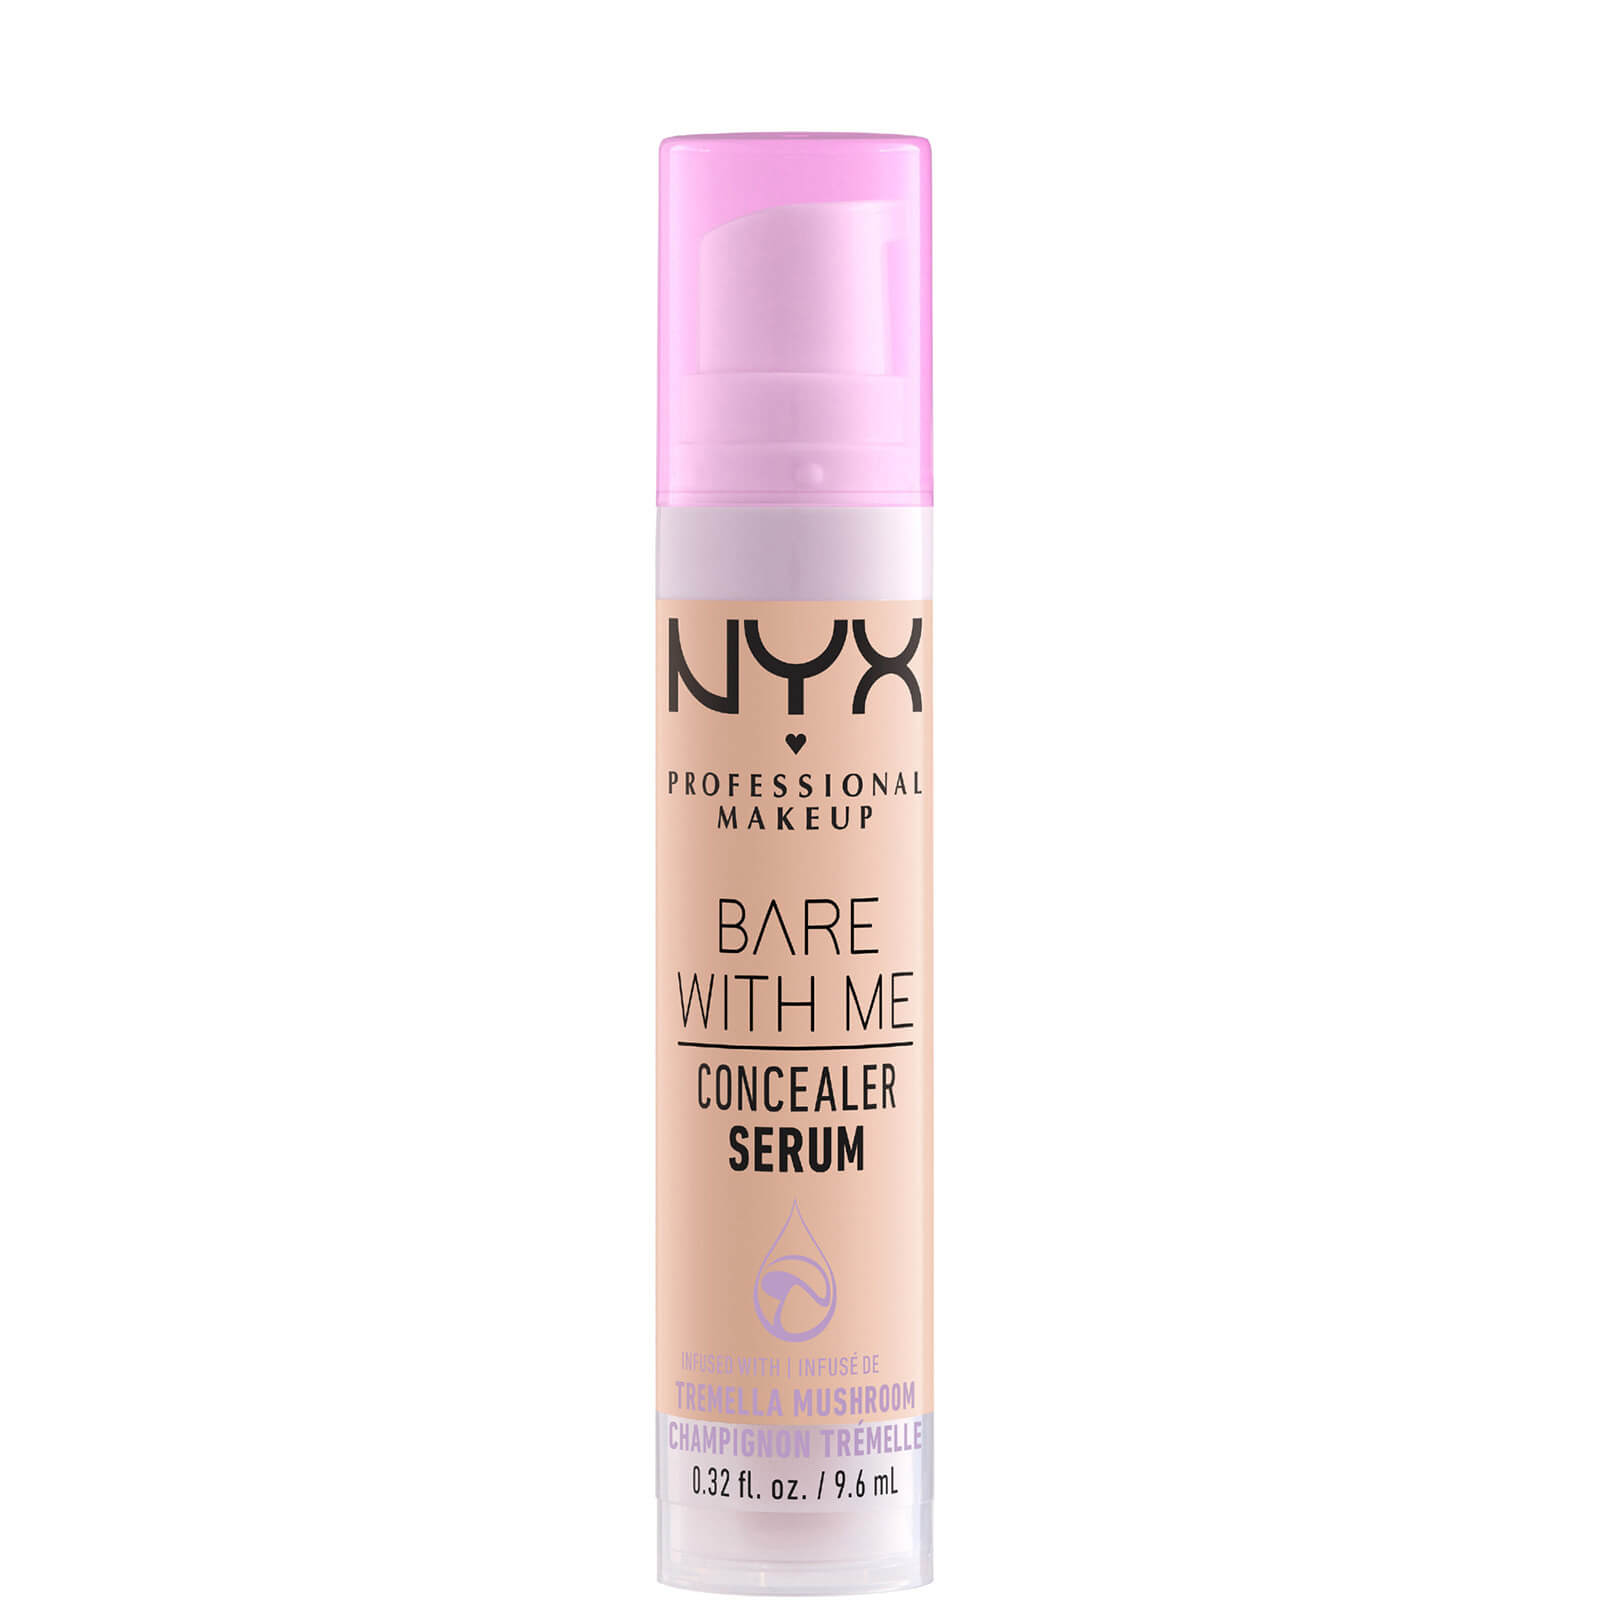 Image of NYX Professional Makeup Bare With Me Concealer Serum 9.6ml (Various Shades) - Light